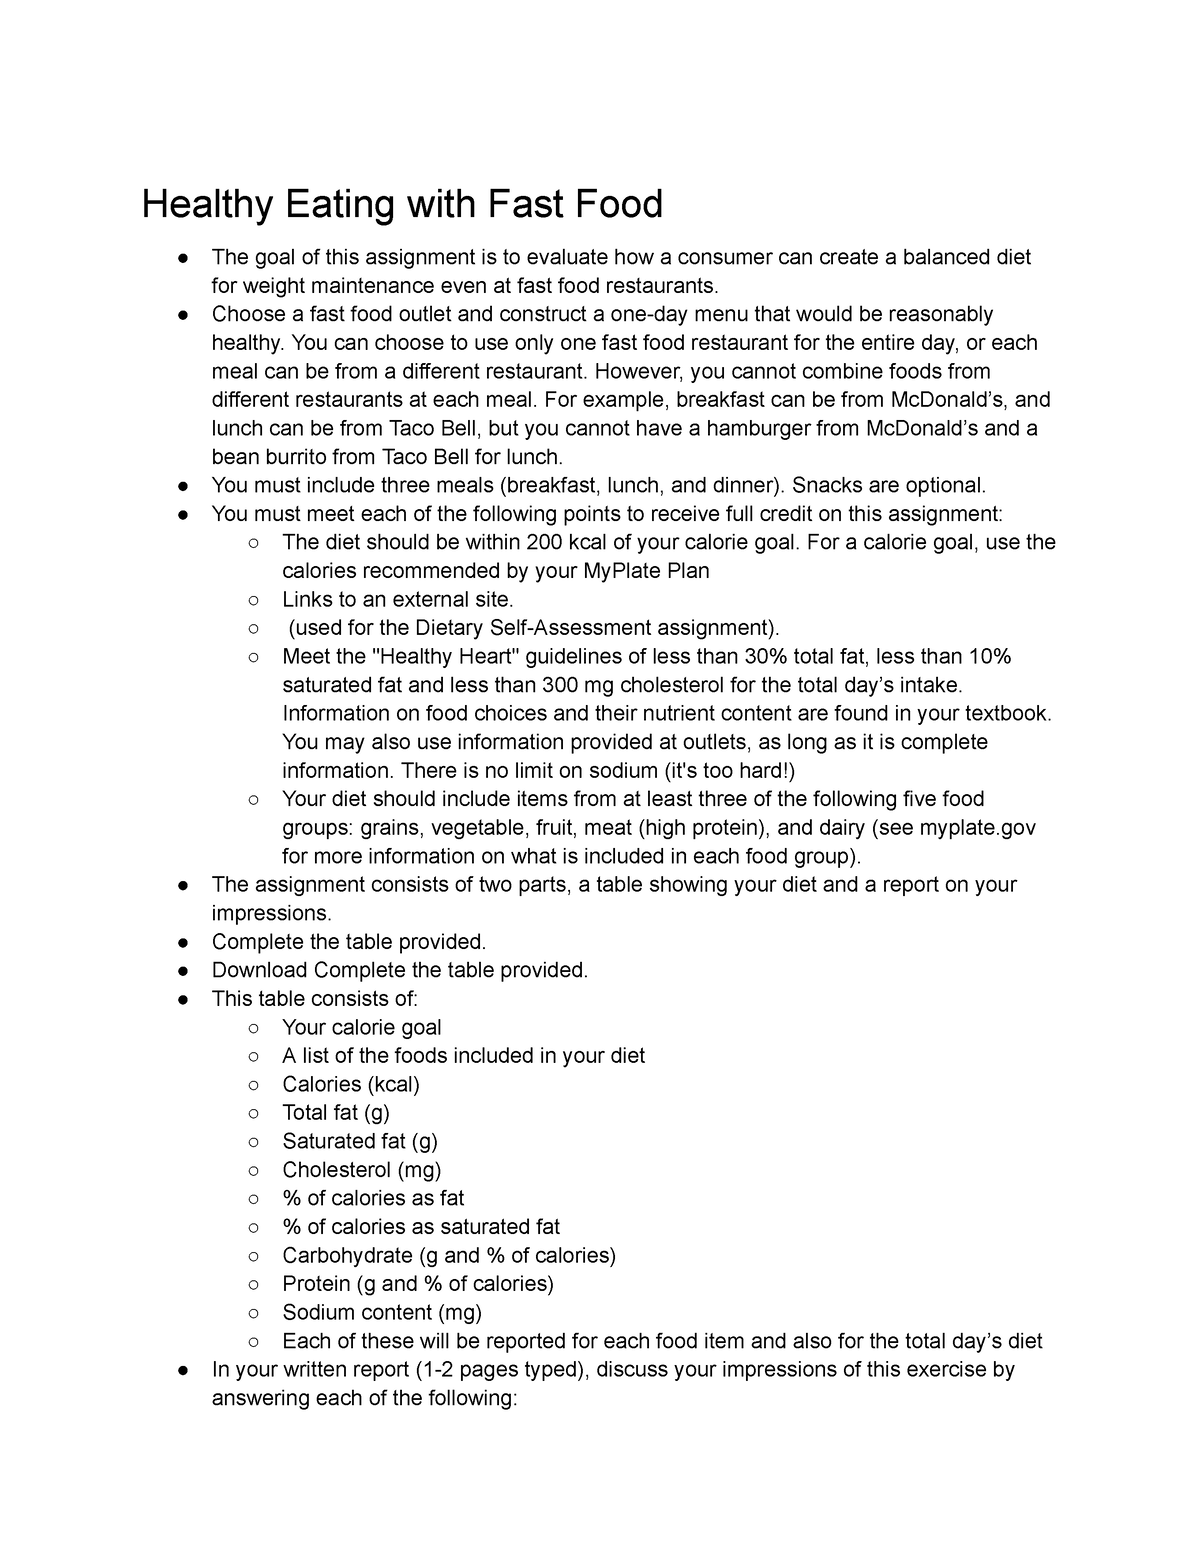 Healthy eating with fast food guidelines - Healthy Eating with Fast ...